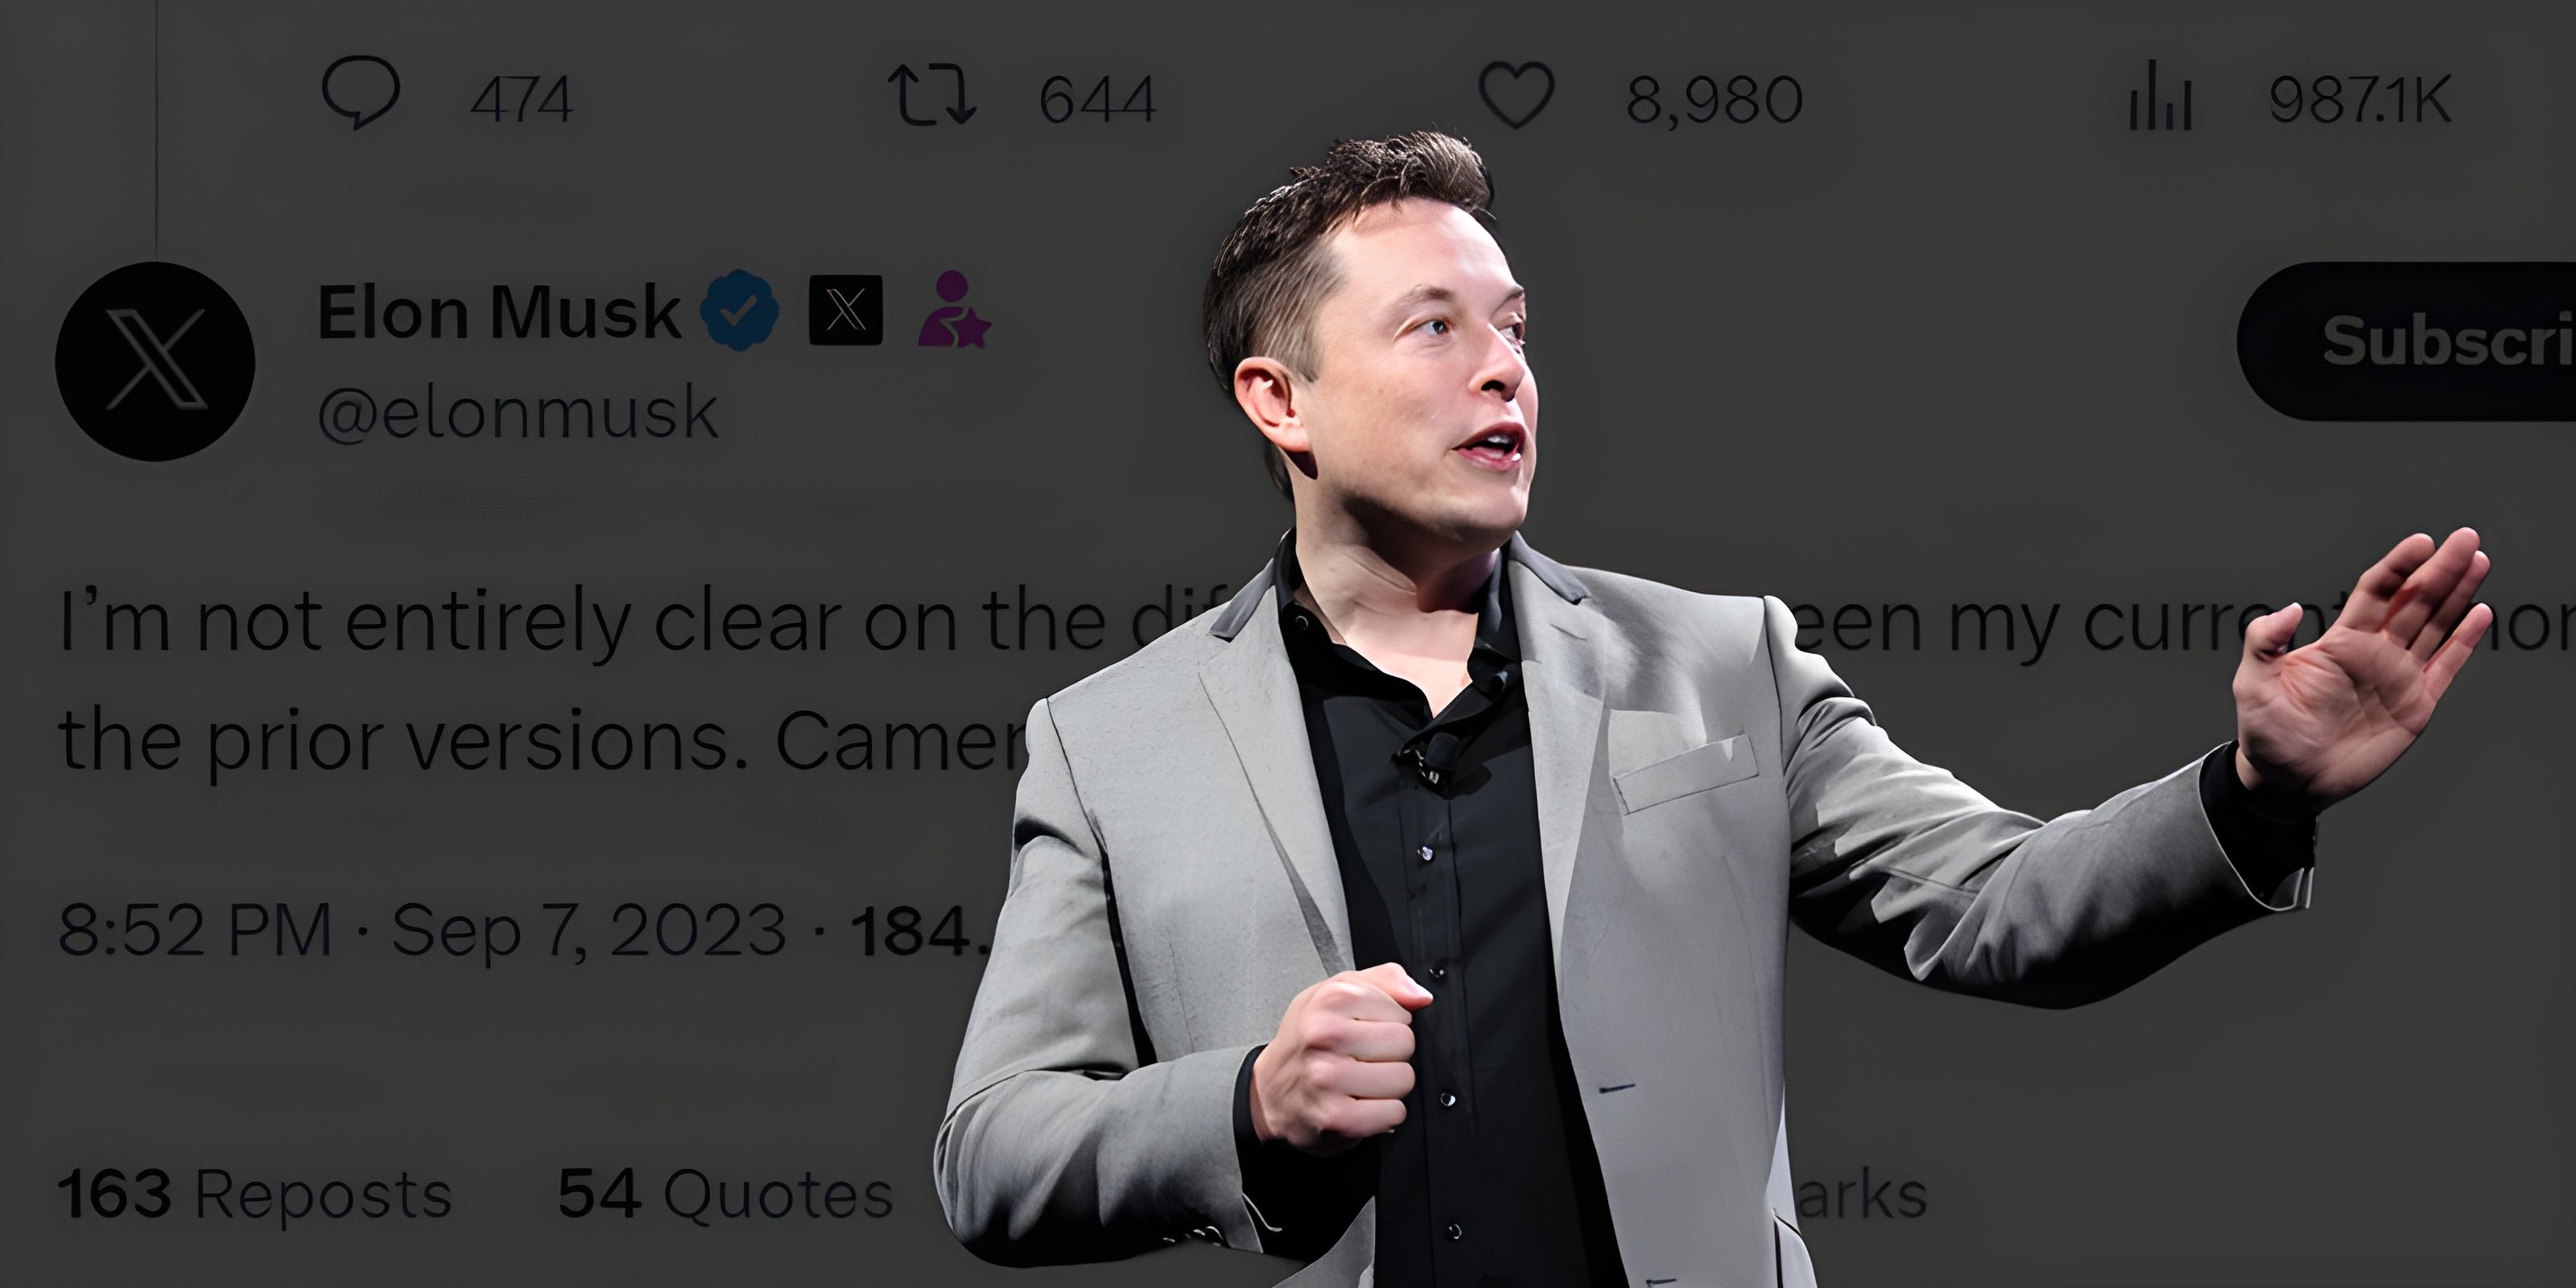 Musk Trolls Apple: 'Not Clear on Differences Between My Current iPhone and Prior Versions